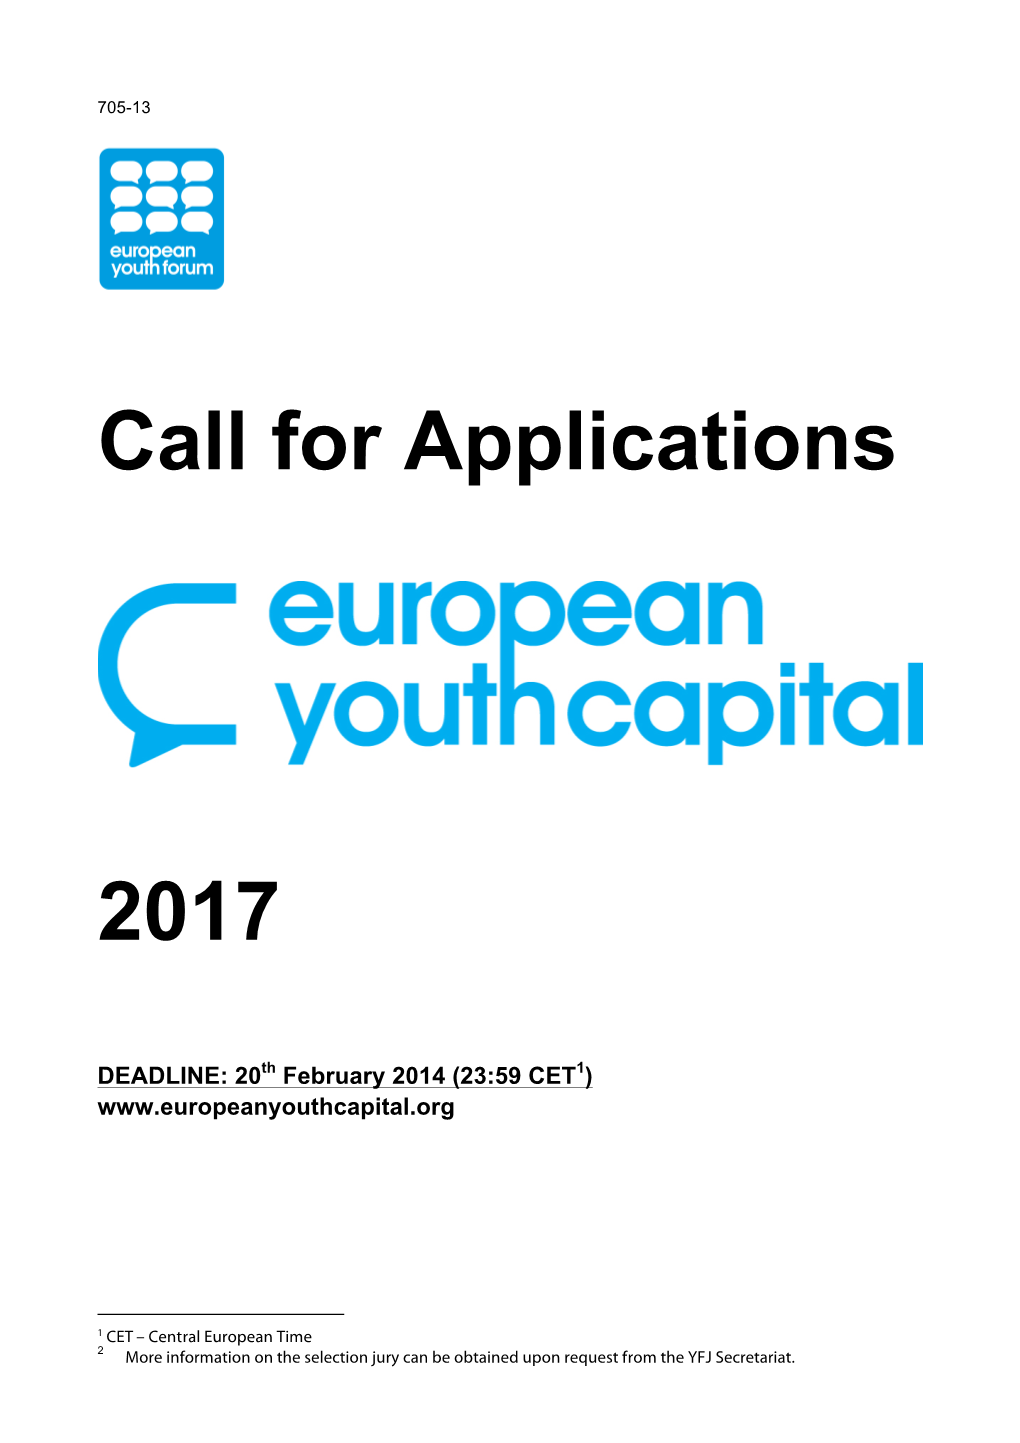 Call for Applications 2017